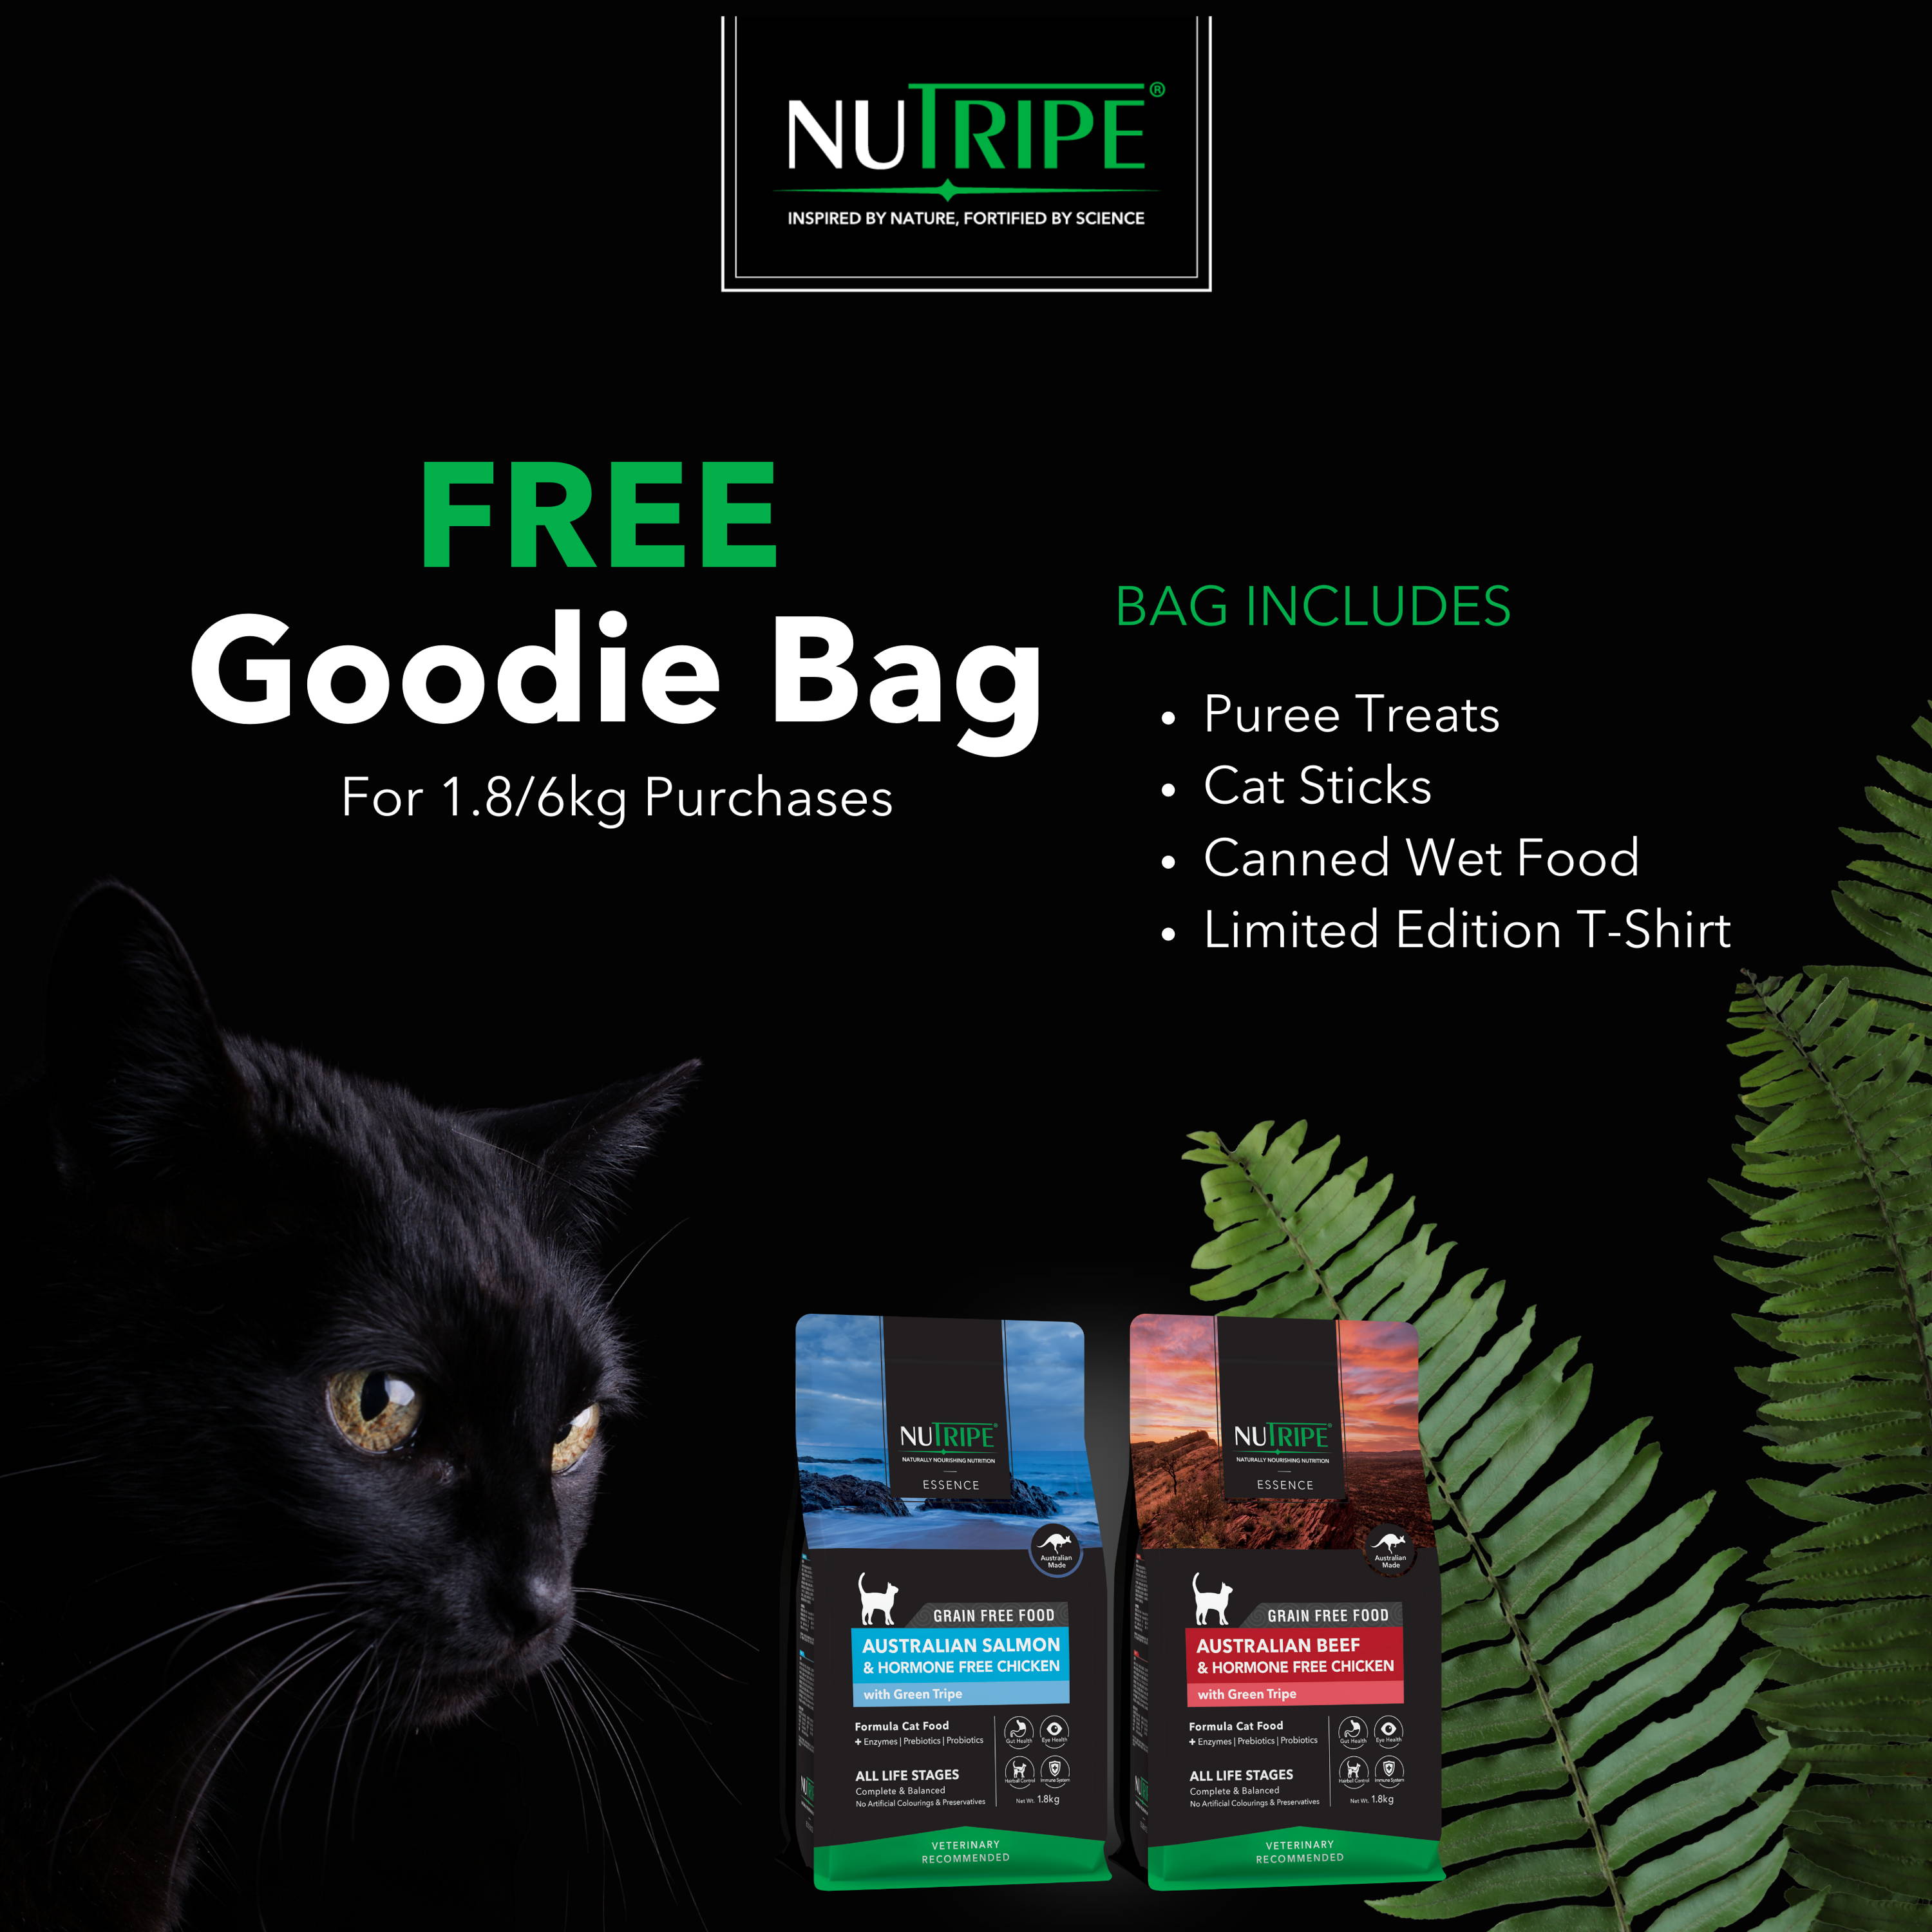 Nutripe Essence Cat Food with free goodie bag for evvery 1.8kg or 6kg bag purchase.